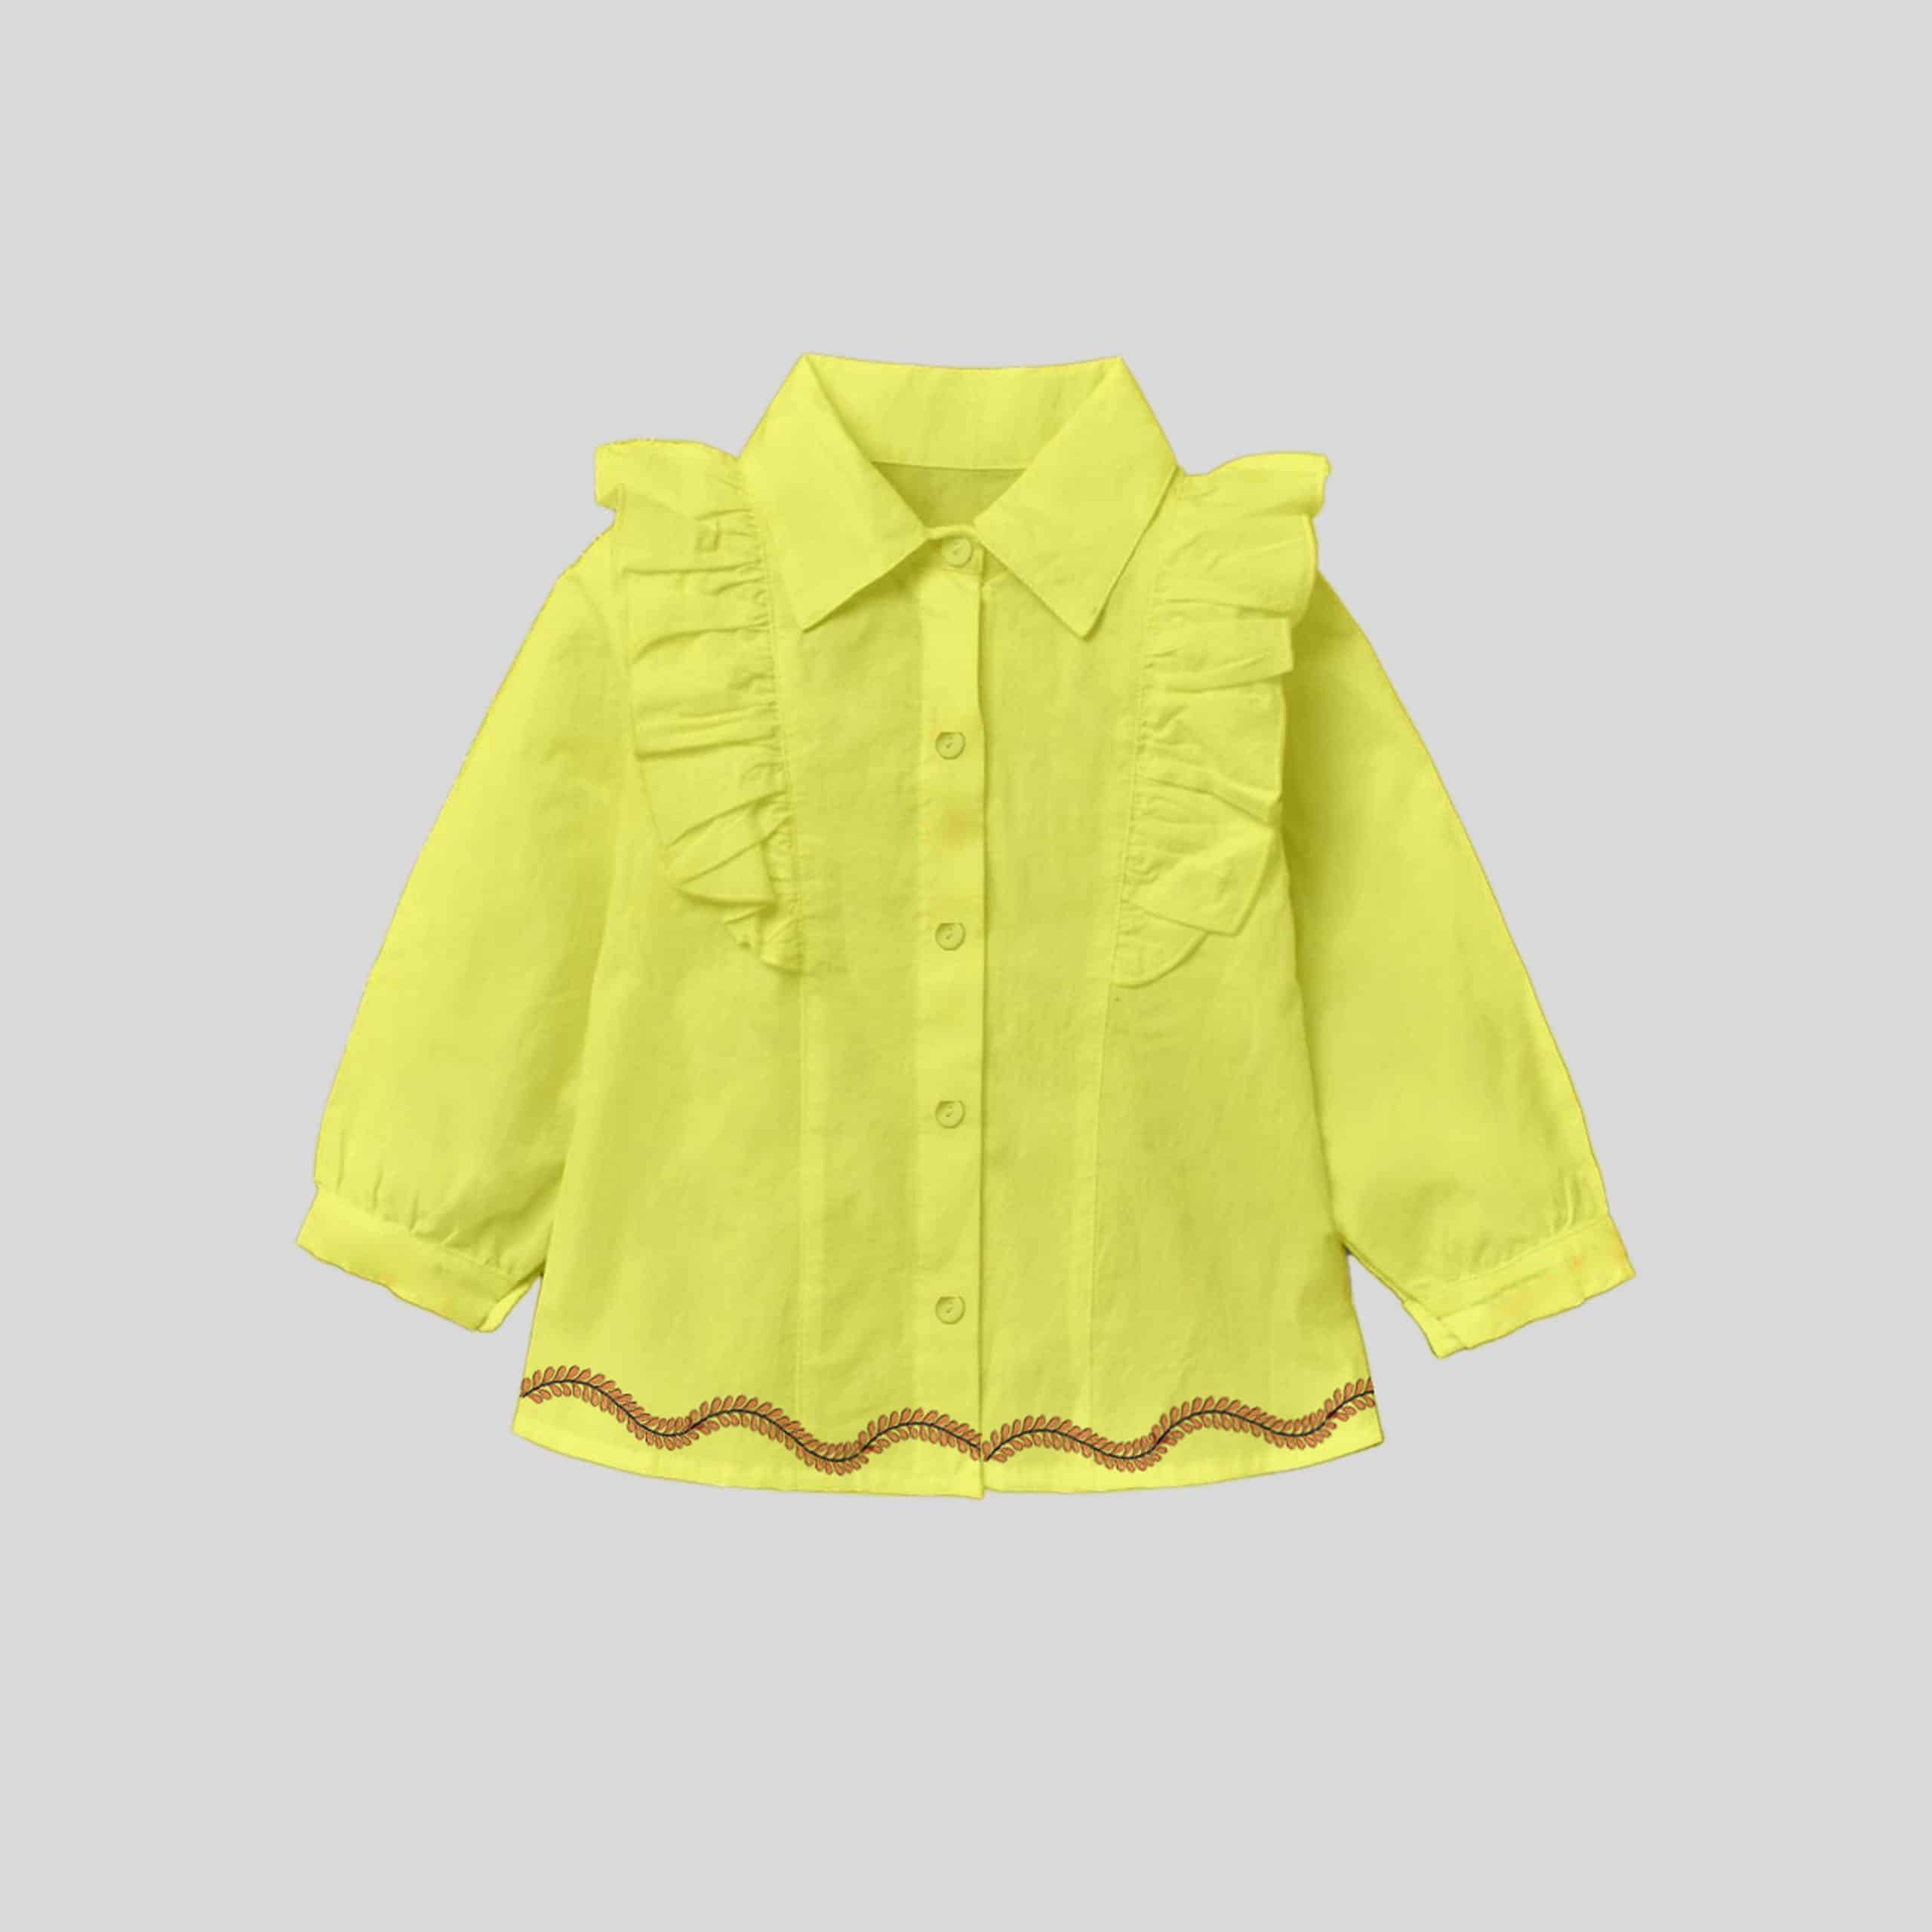 Girls Yellow Frill Top with Cute Floral Print - RKFCW331